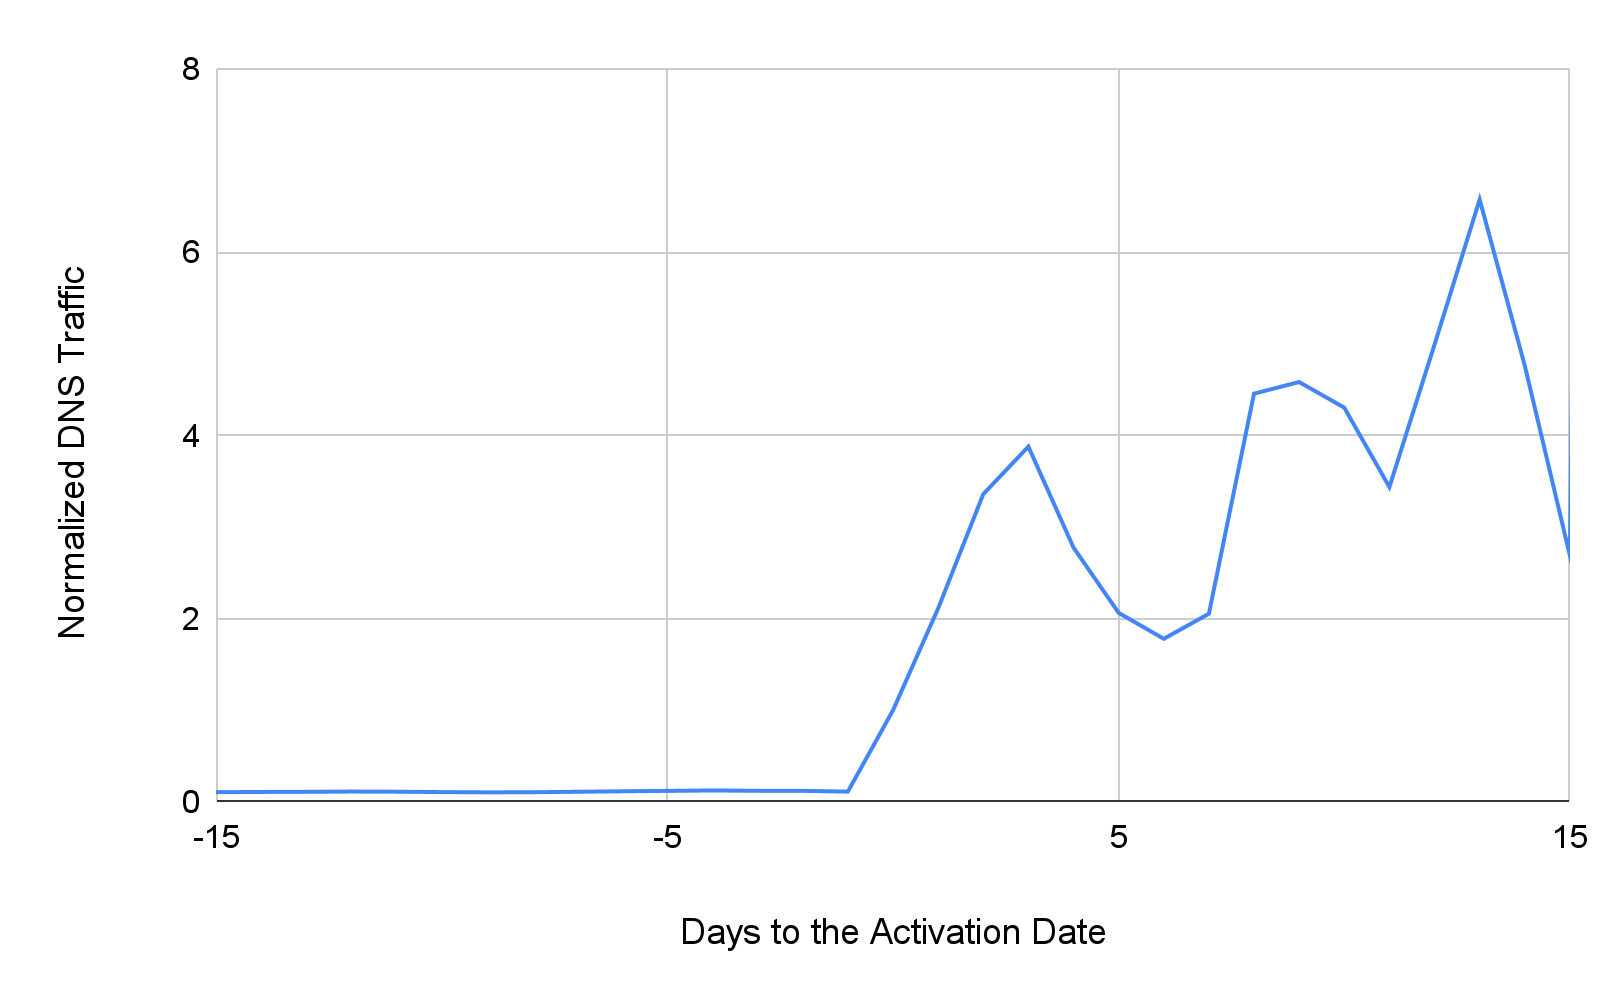 Normalized DNS traffic of strategically aged domains. The line shows the spike in traffic that typically occurs when a domain suddenly changes from dormant to active. 